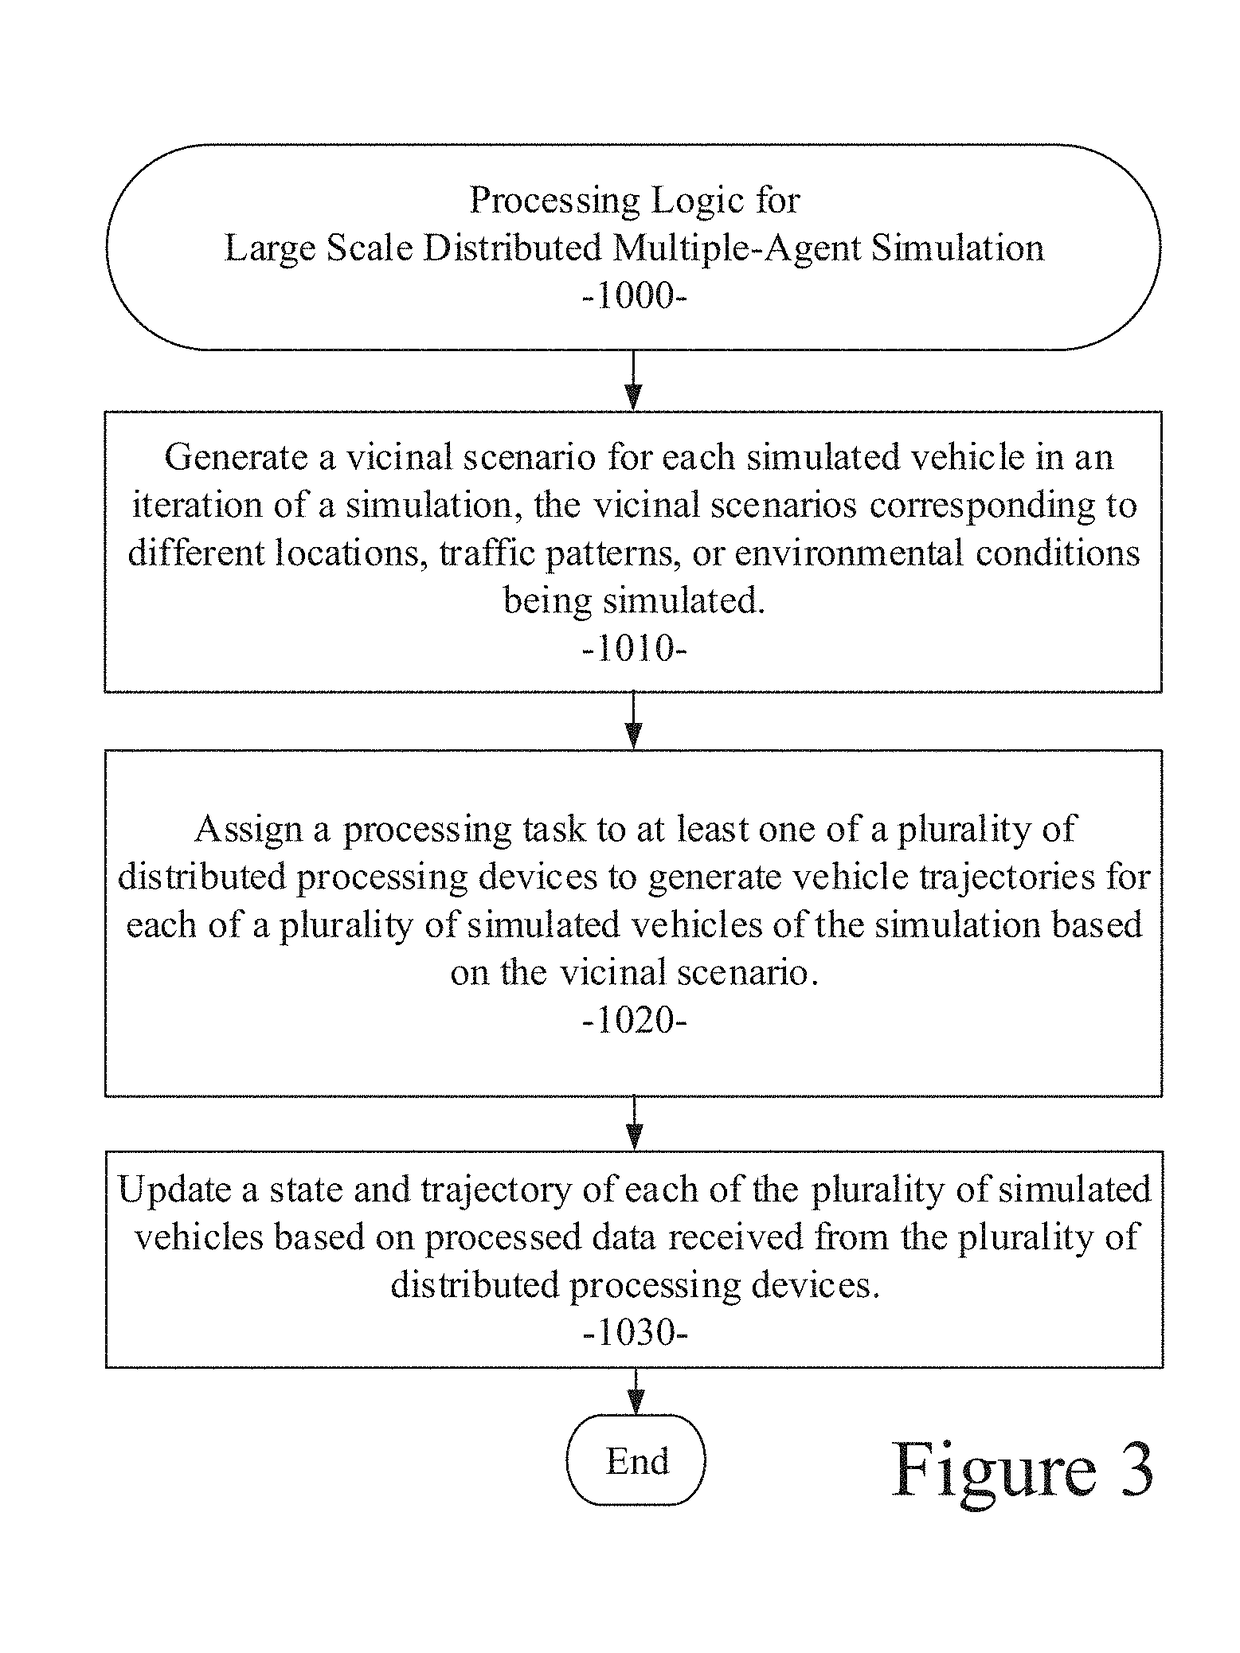 Large scale distributed simulation for realistic multiple-agent interactive environments